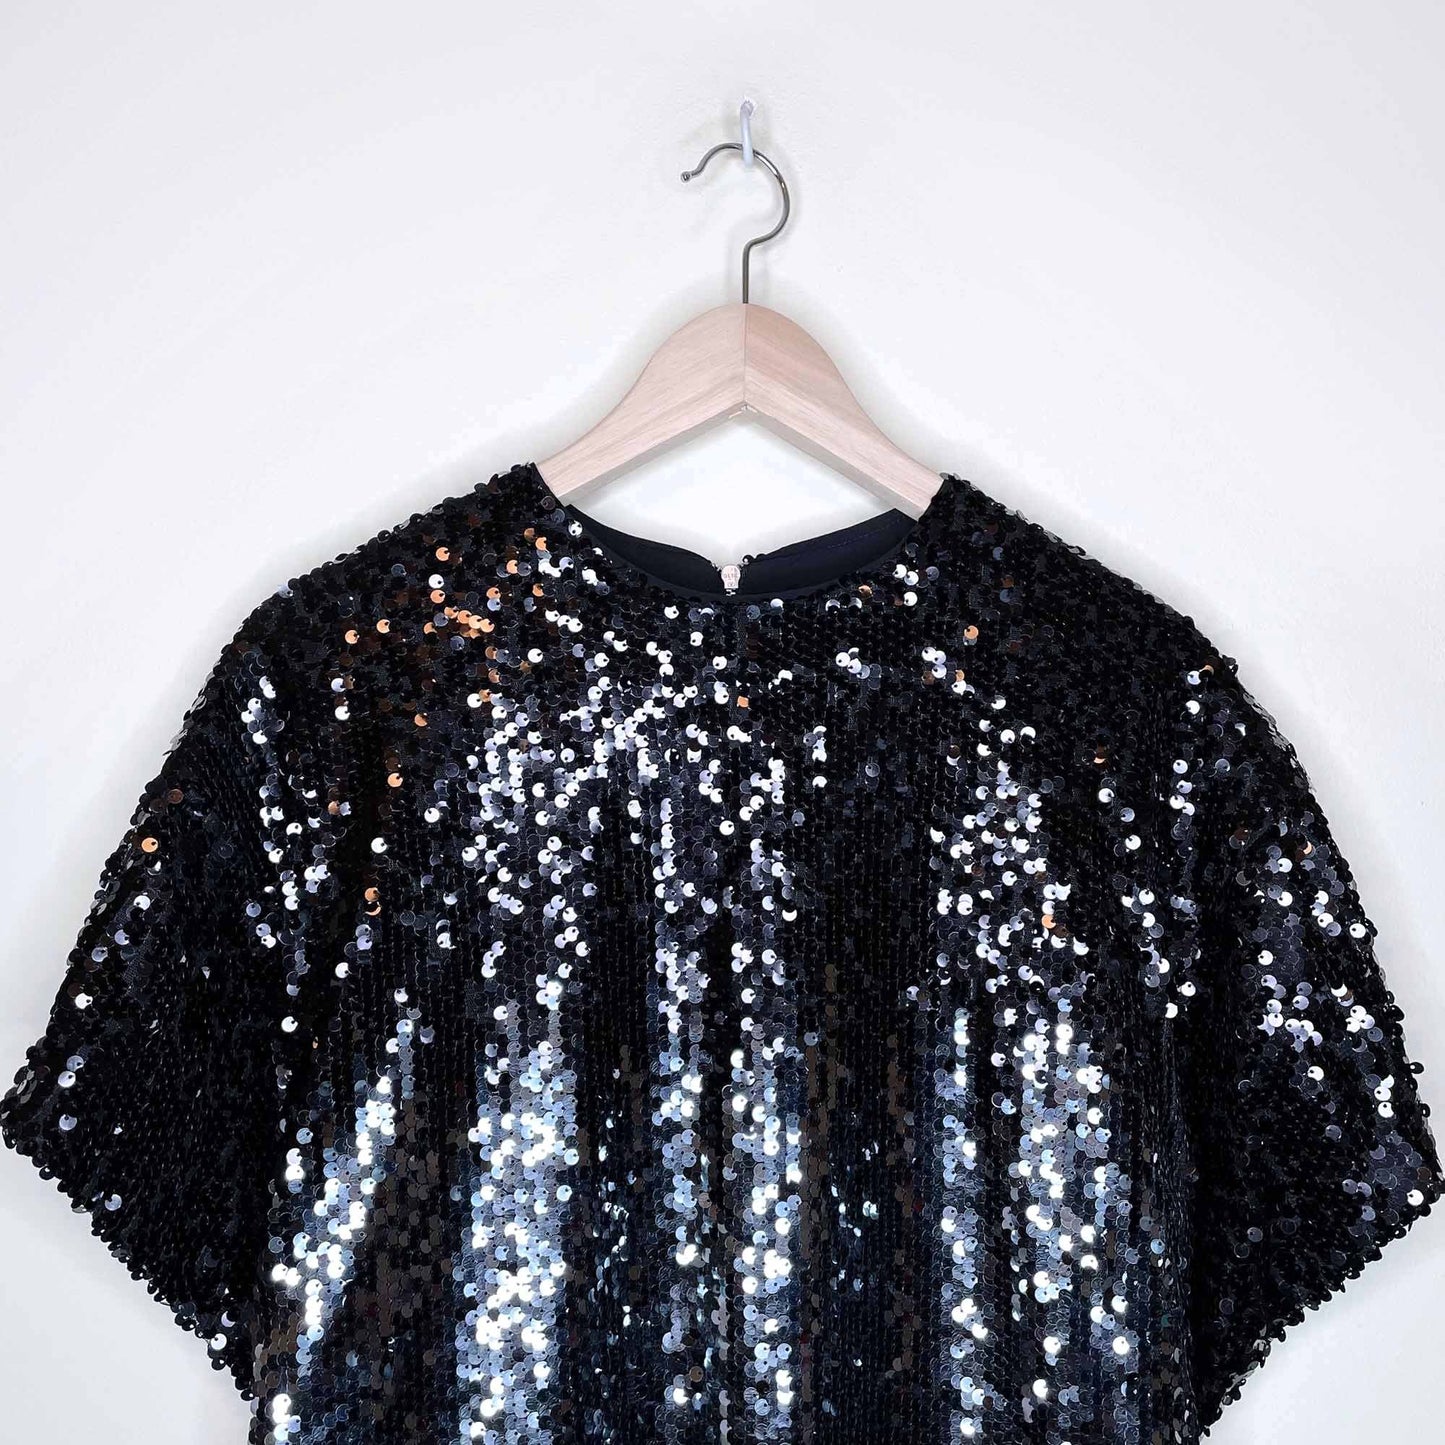 alison hayes short sleeve ombre sequin party dress - size small